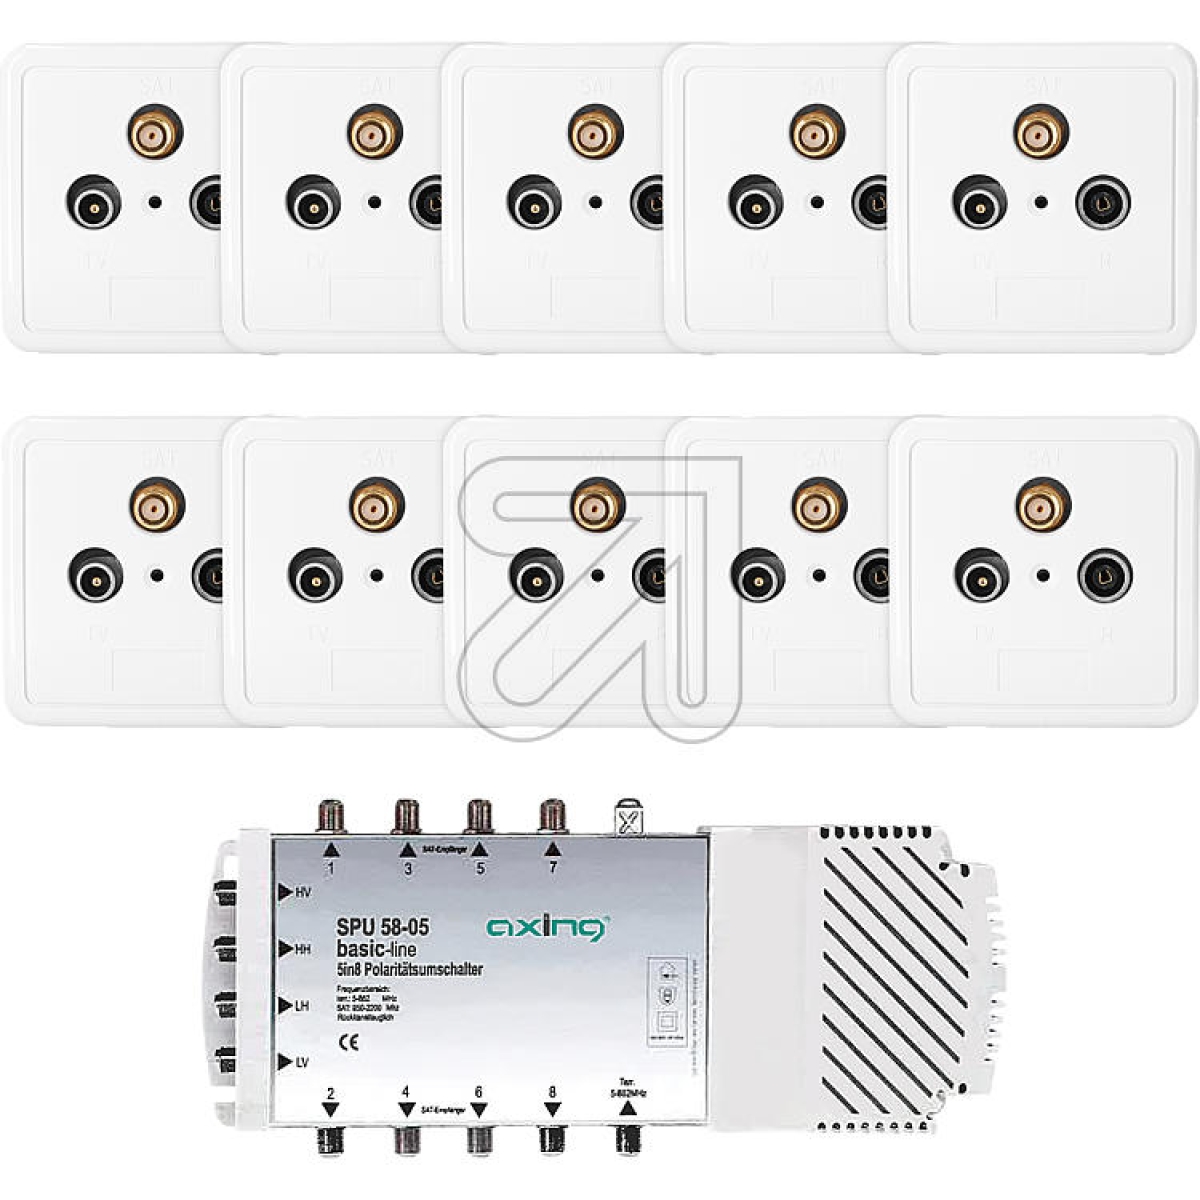 AxingAction package multi-switch with connection sockets